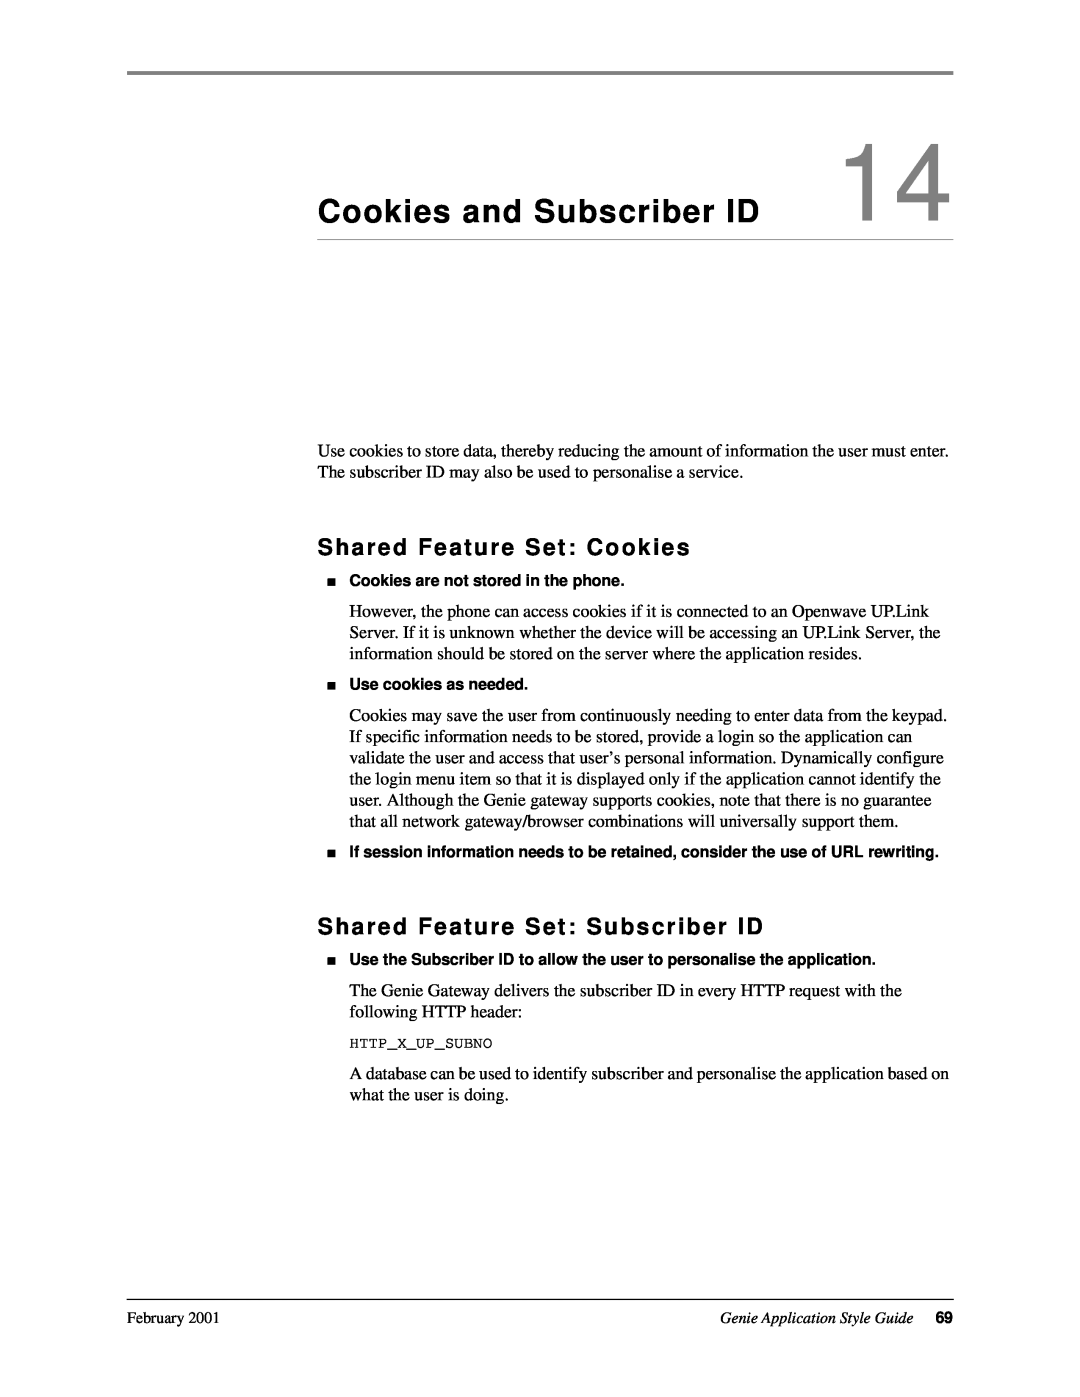 Genie 7110 manual Cookies and Subscriber ID, Shared Feature Set Cookies, Shared Feature Set Subscriber ID 